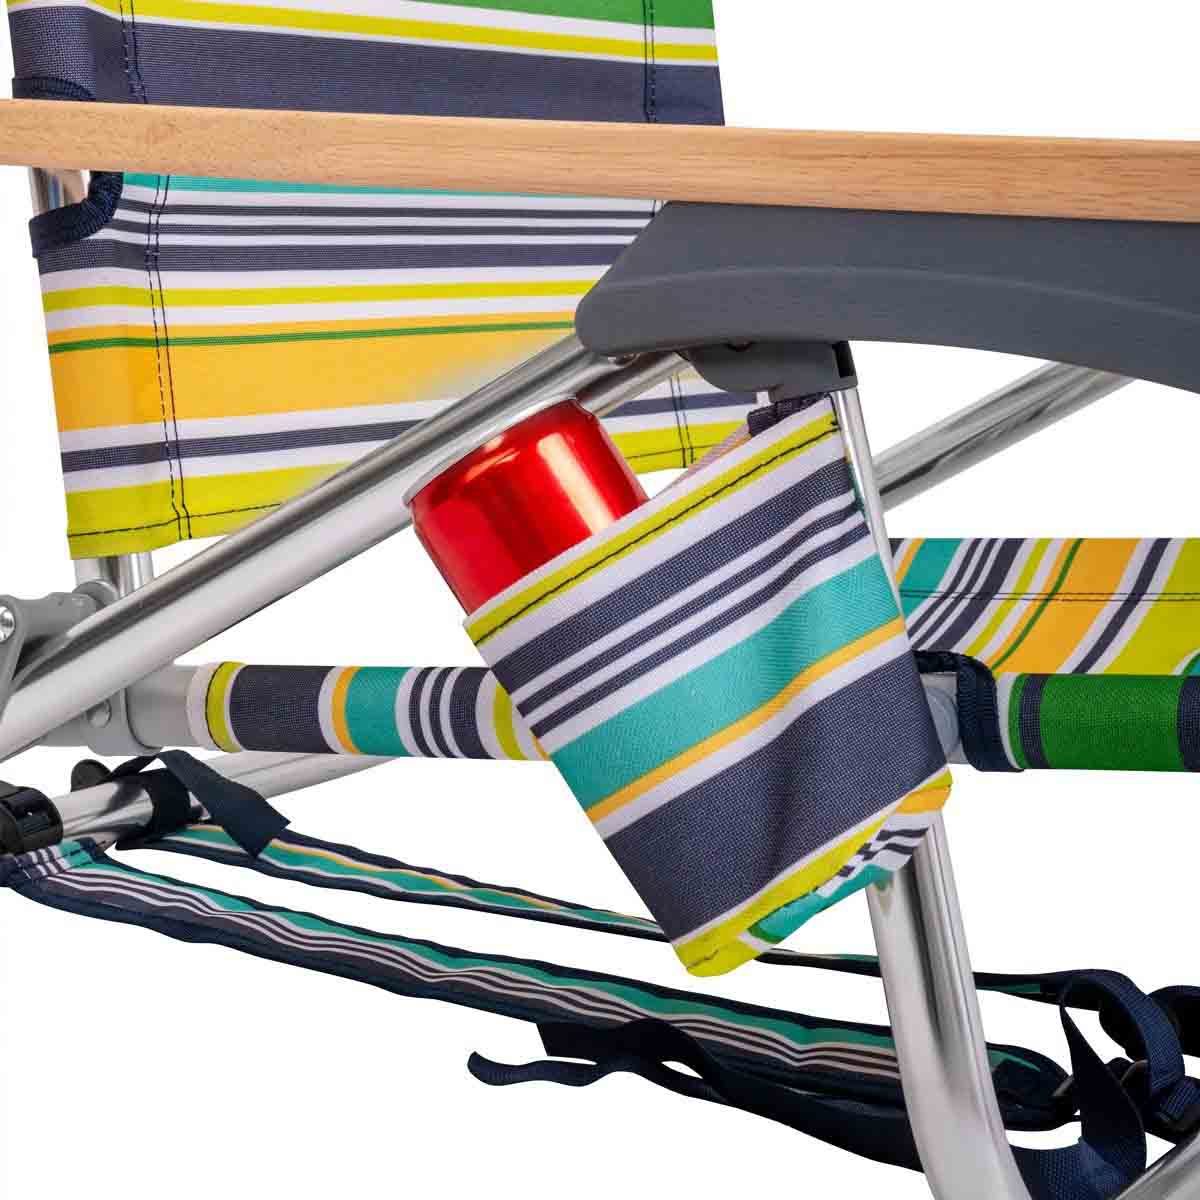 Lightest Backpack Beach Chair with Cup Holder featuring a pocket on the armrest to handle your belongings